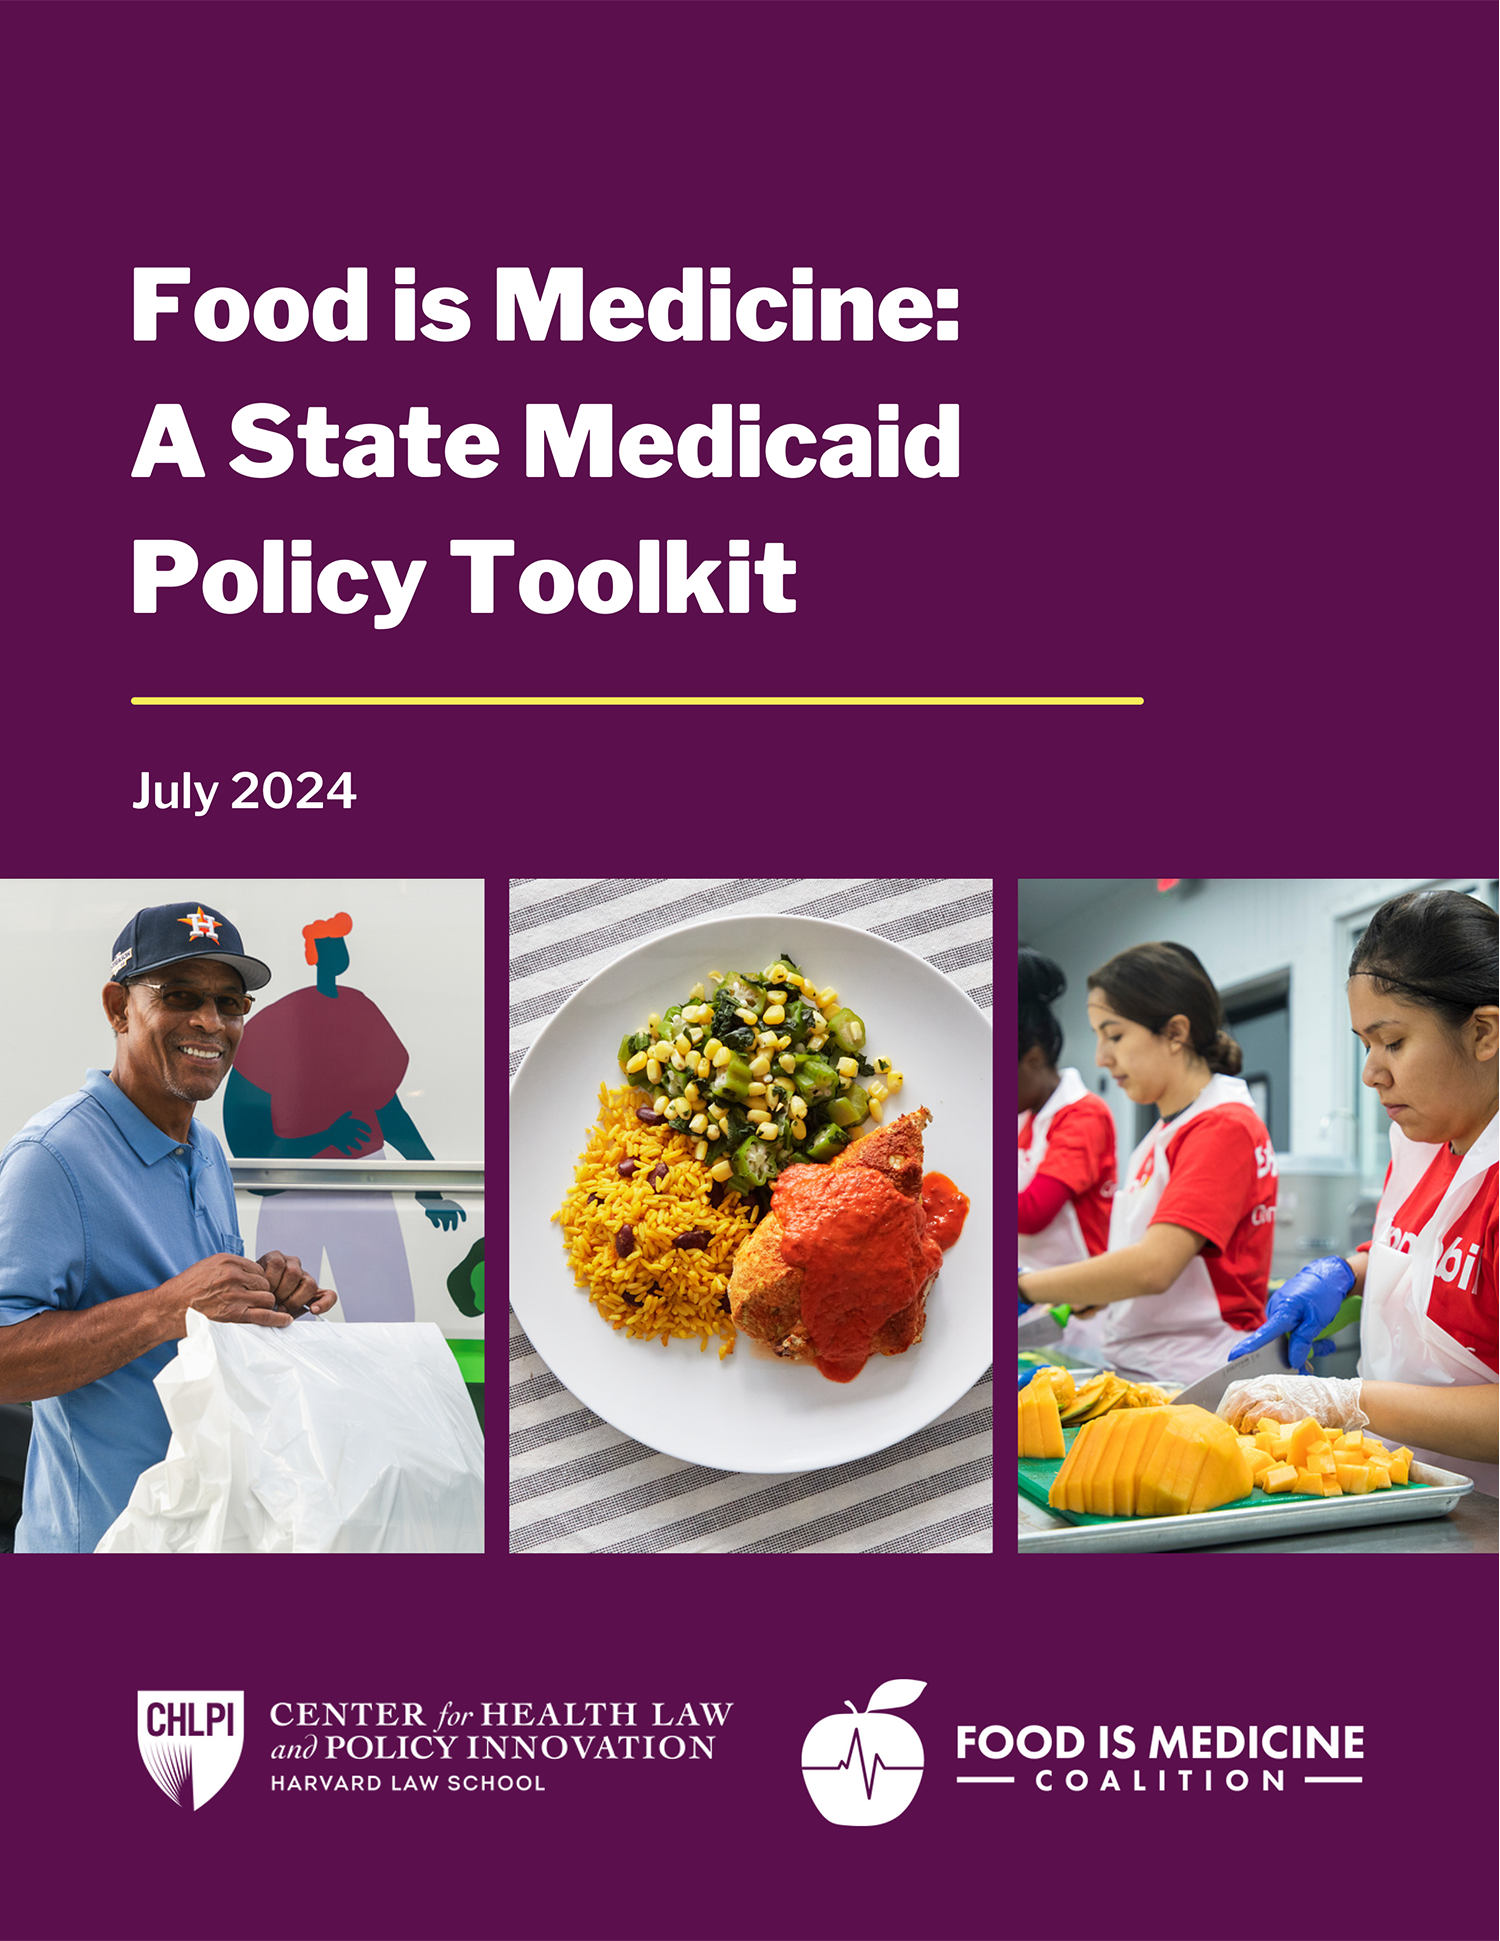 Food is Medicine: A State Medicaid Policy Toolkit